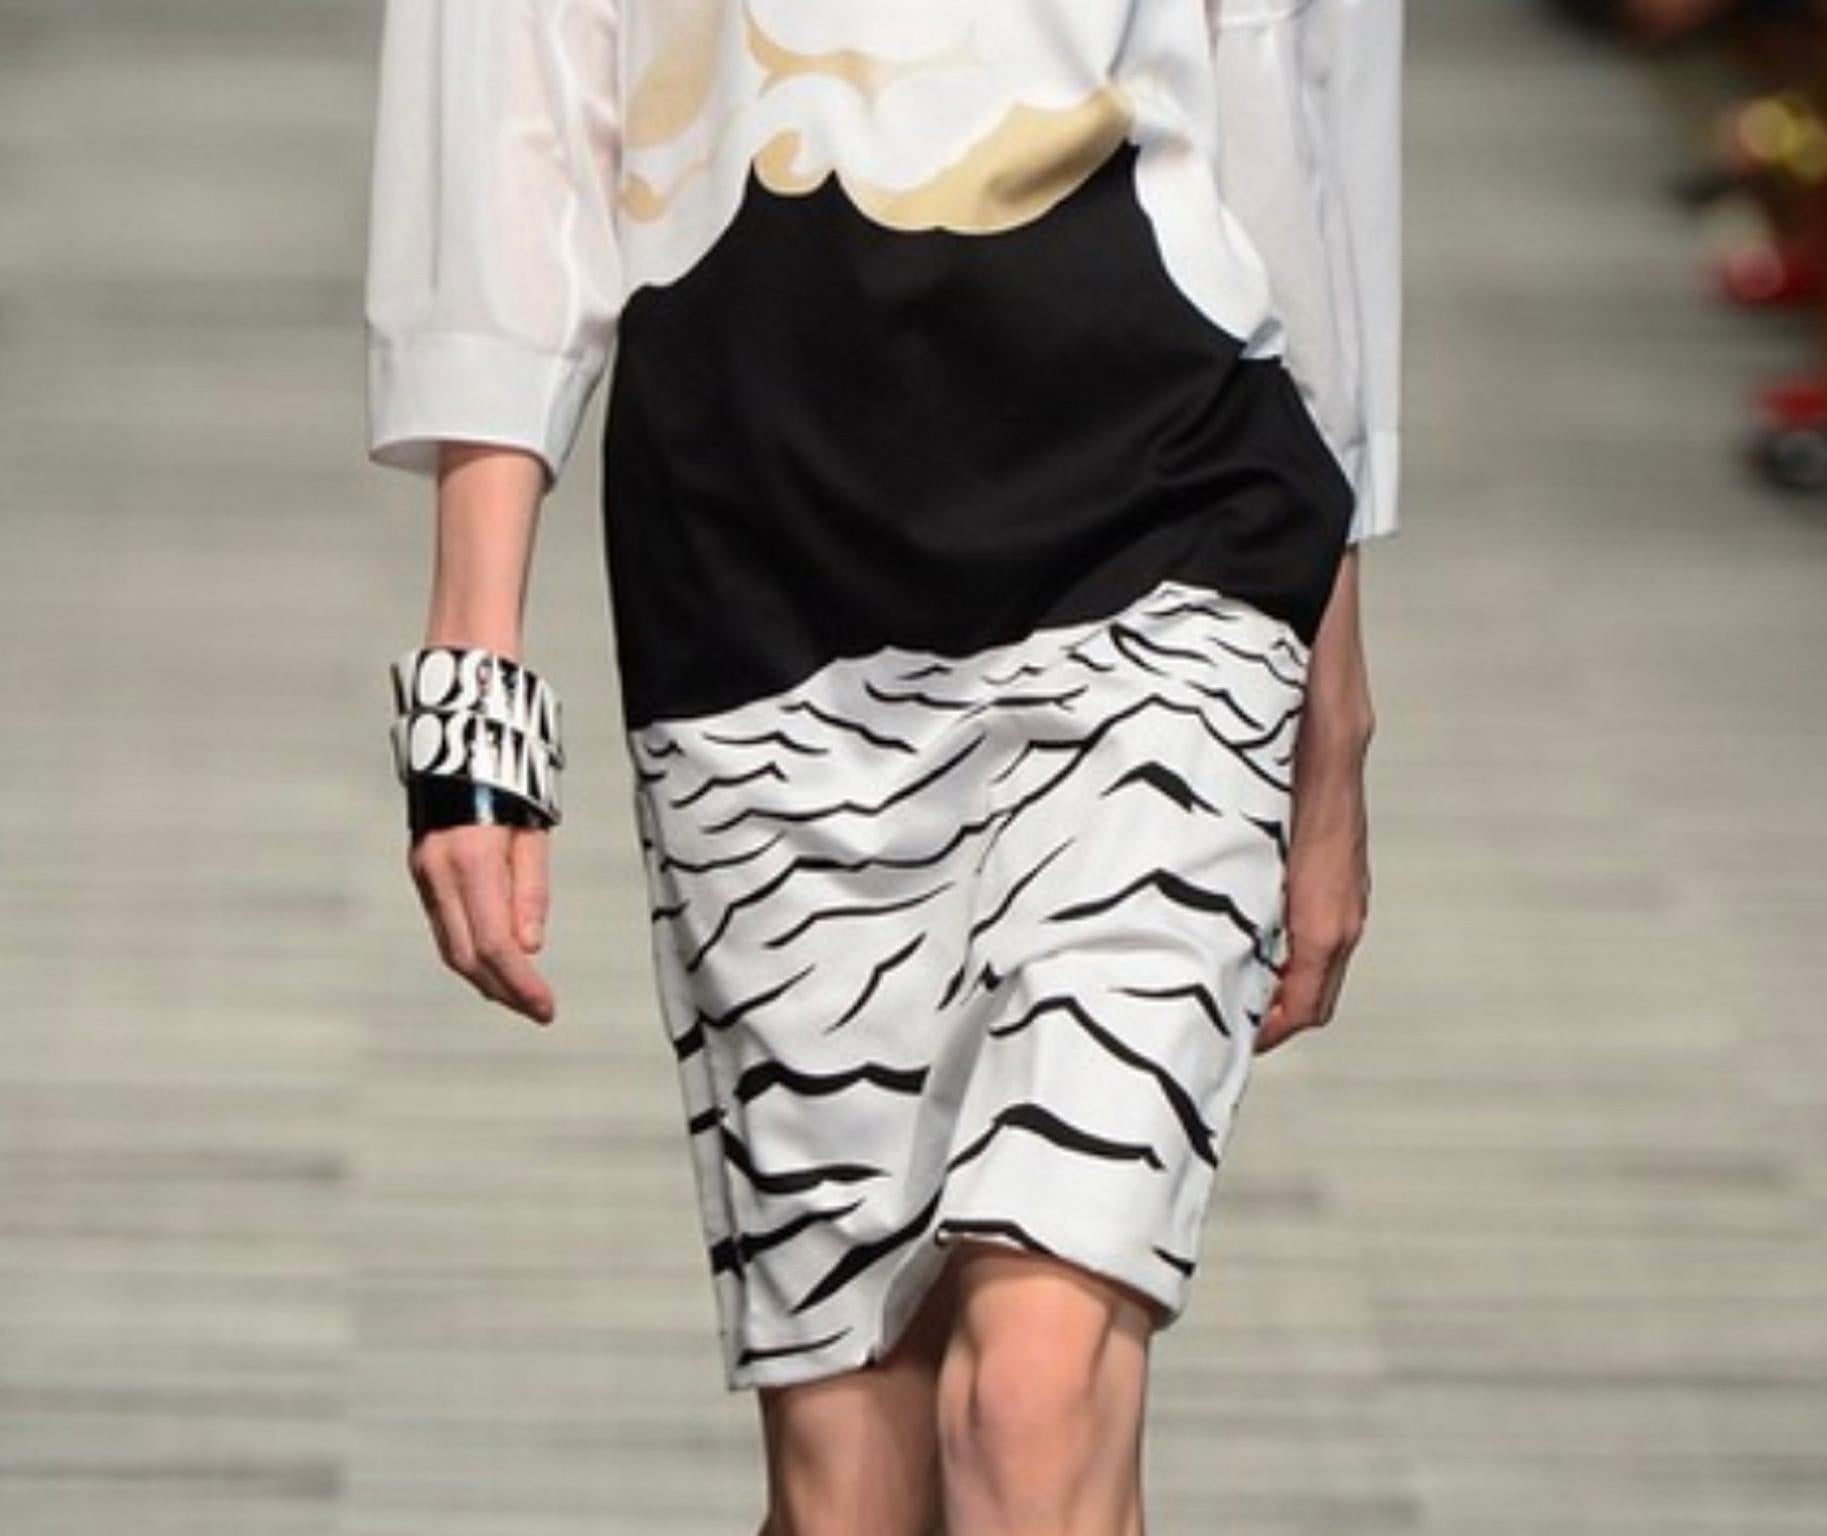 Missoni Black and White Lucite and Metal Bracelet Bangle, Runway Spring 2014 For Sale 6